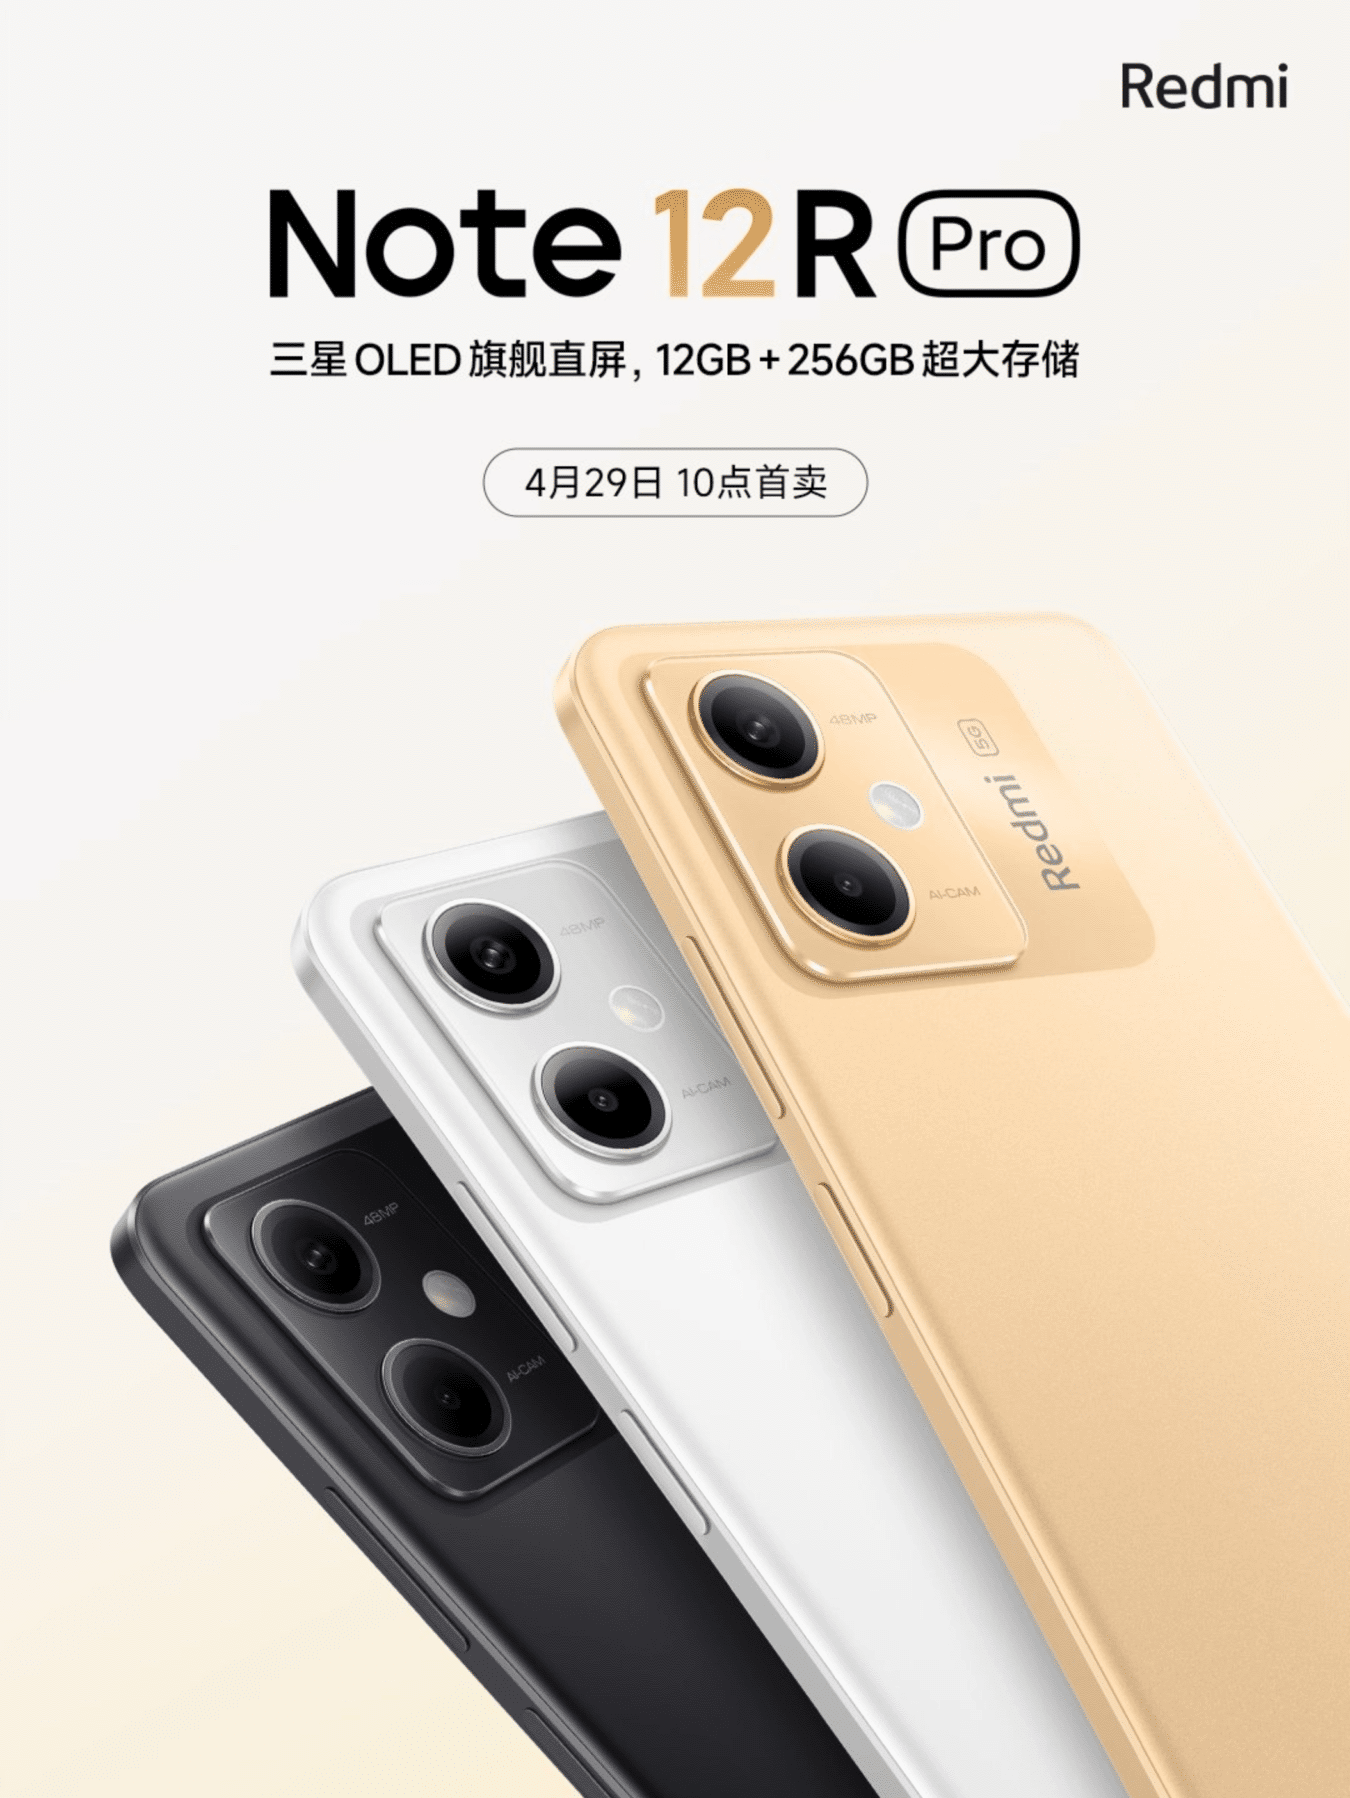 Redmi Note 12R Pro launching on April 29th